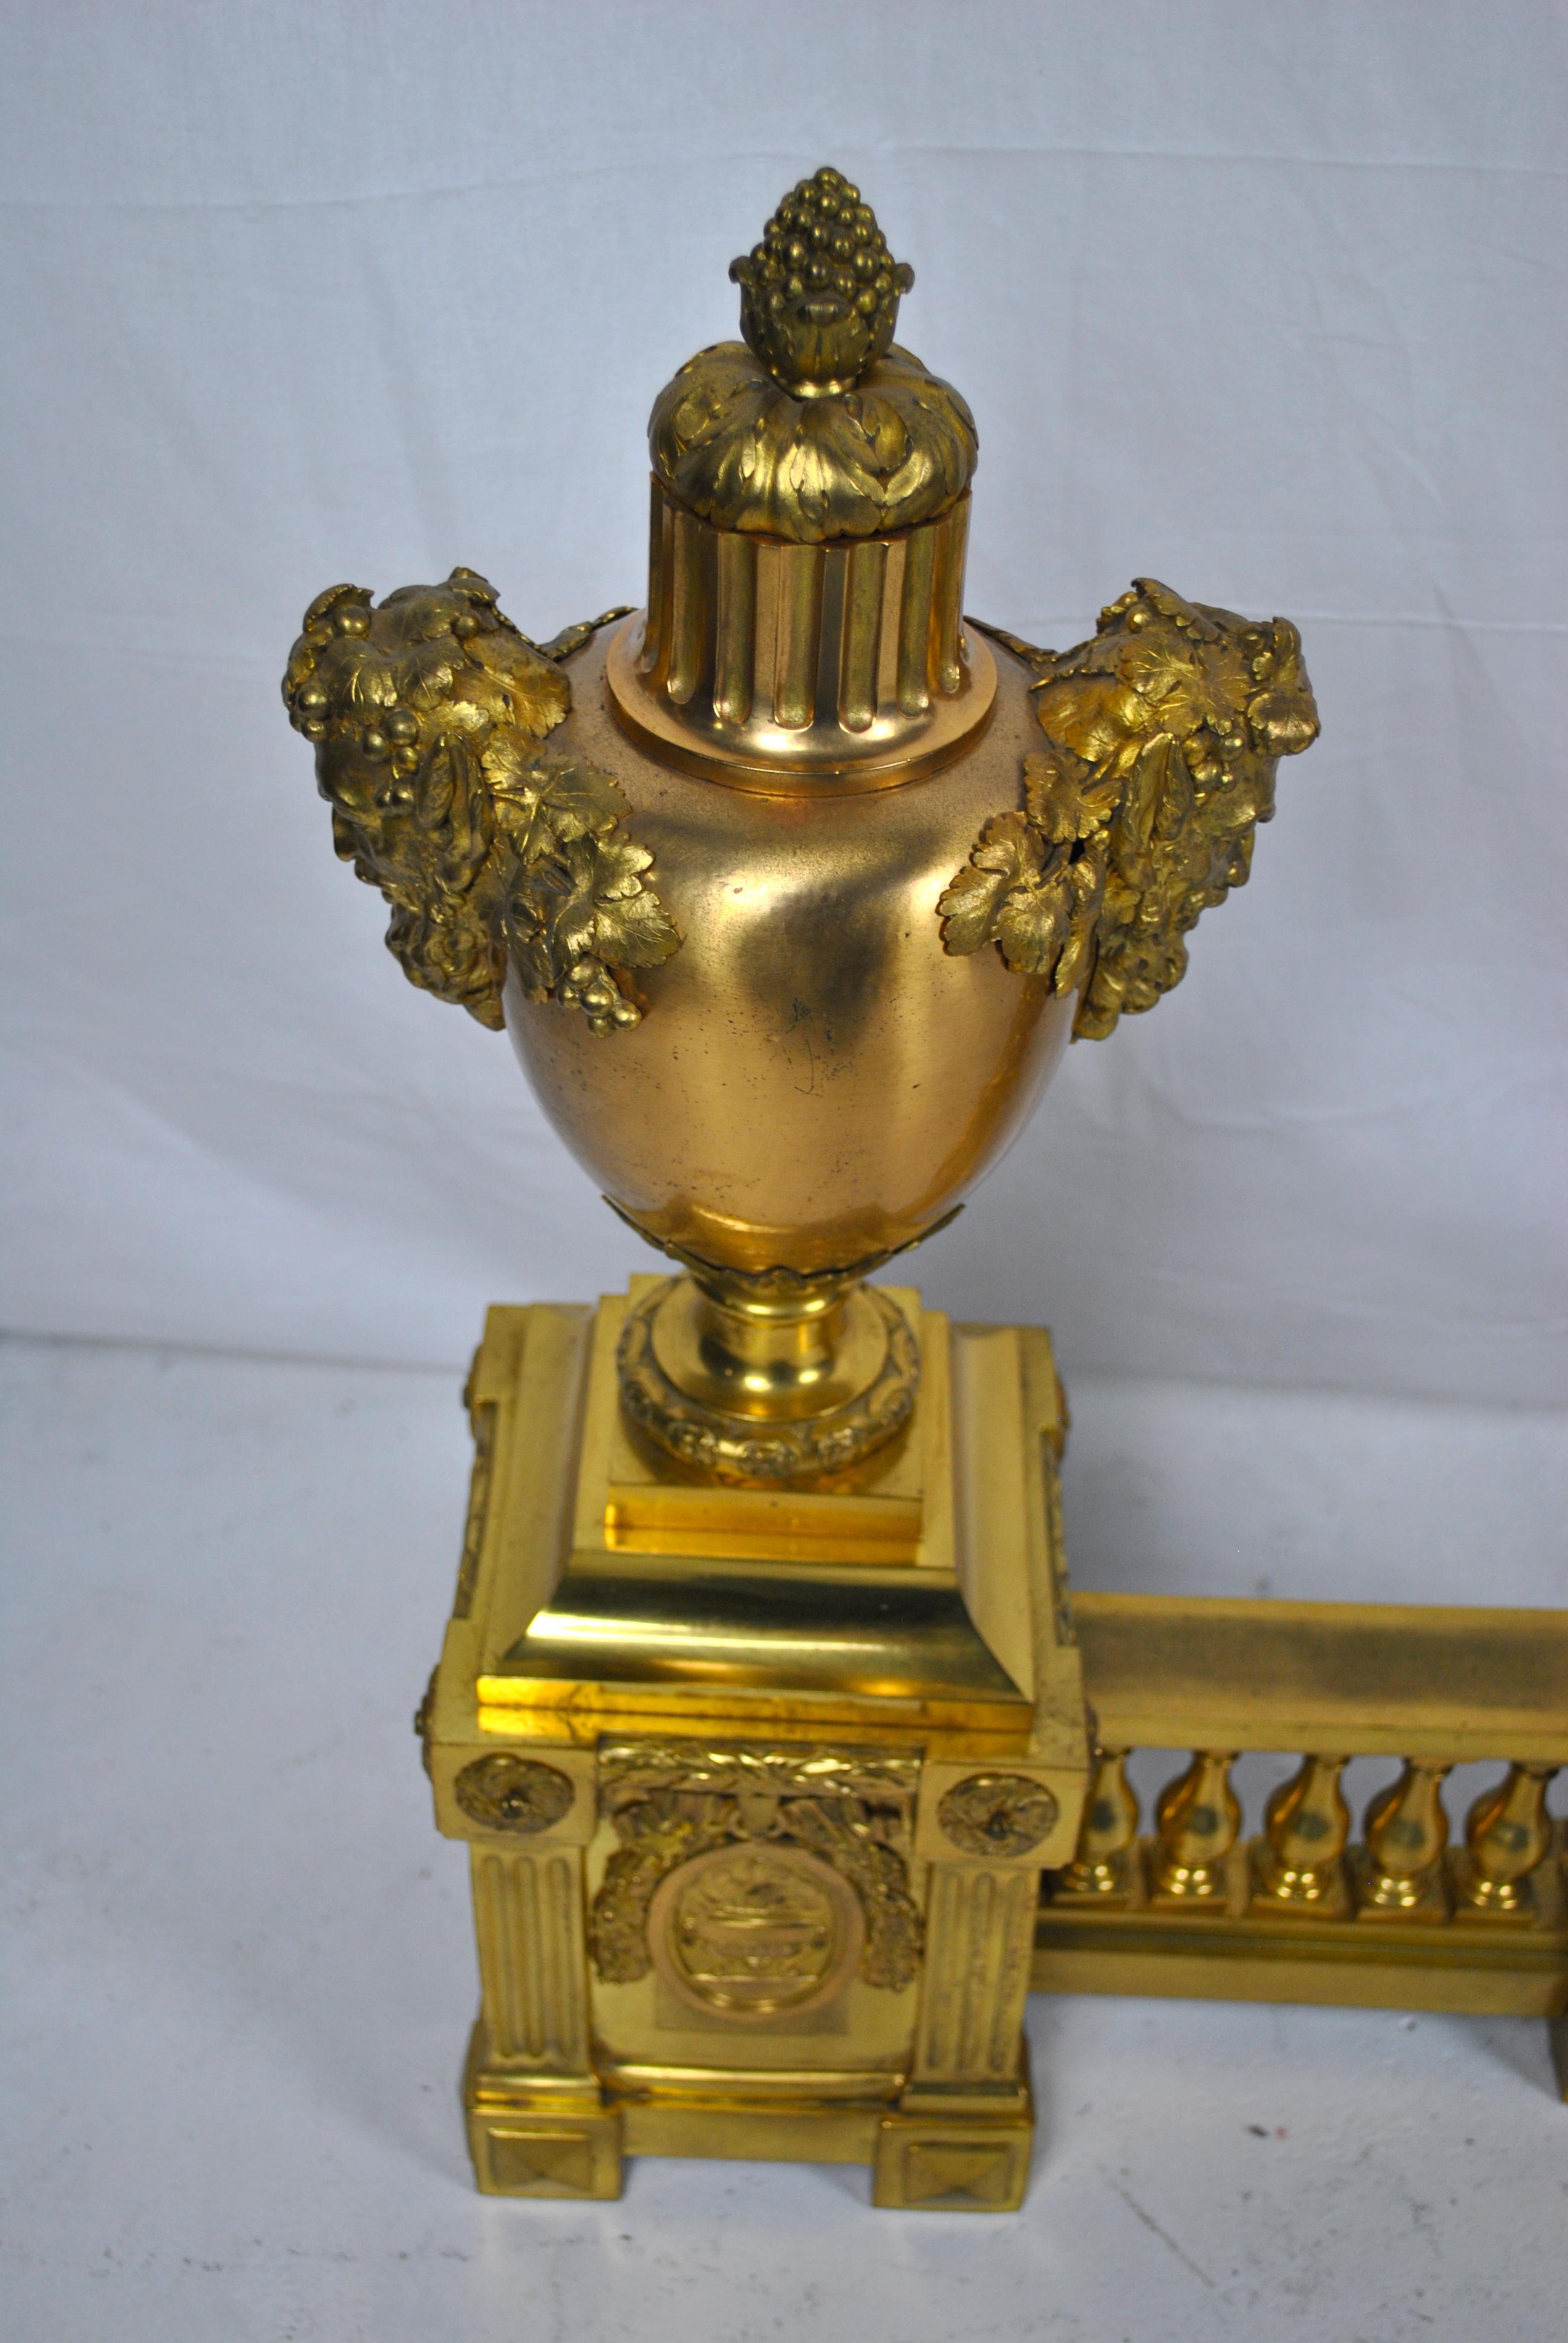 A large elaborate French ormolu on brass fire fender with fire urns in the centre moving to the heads of Bacchus on each side of the outer urns set upon pillars plinths attached to the classic gallery frees and balustrade. Resets attached to each